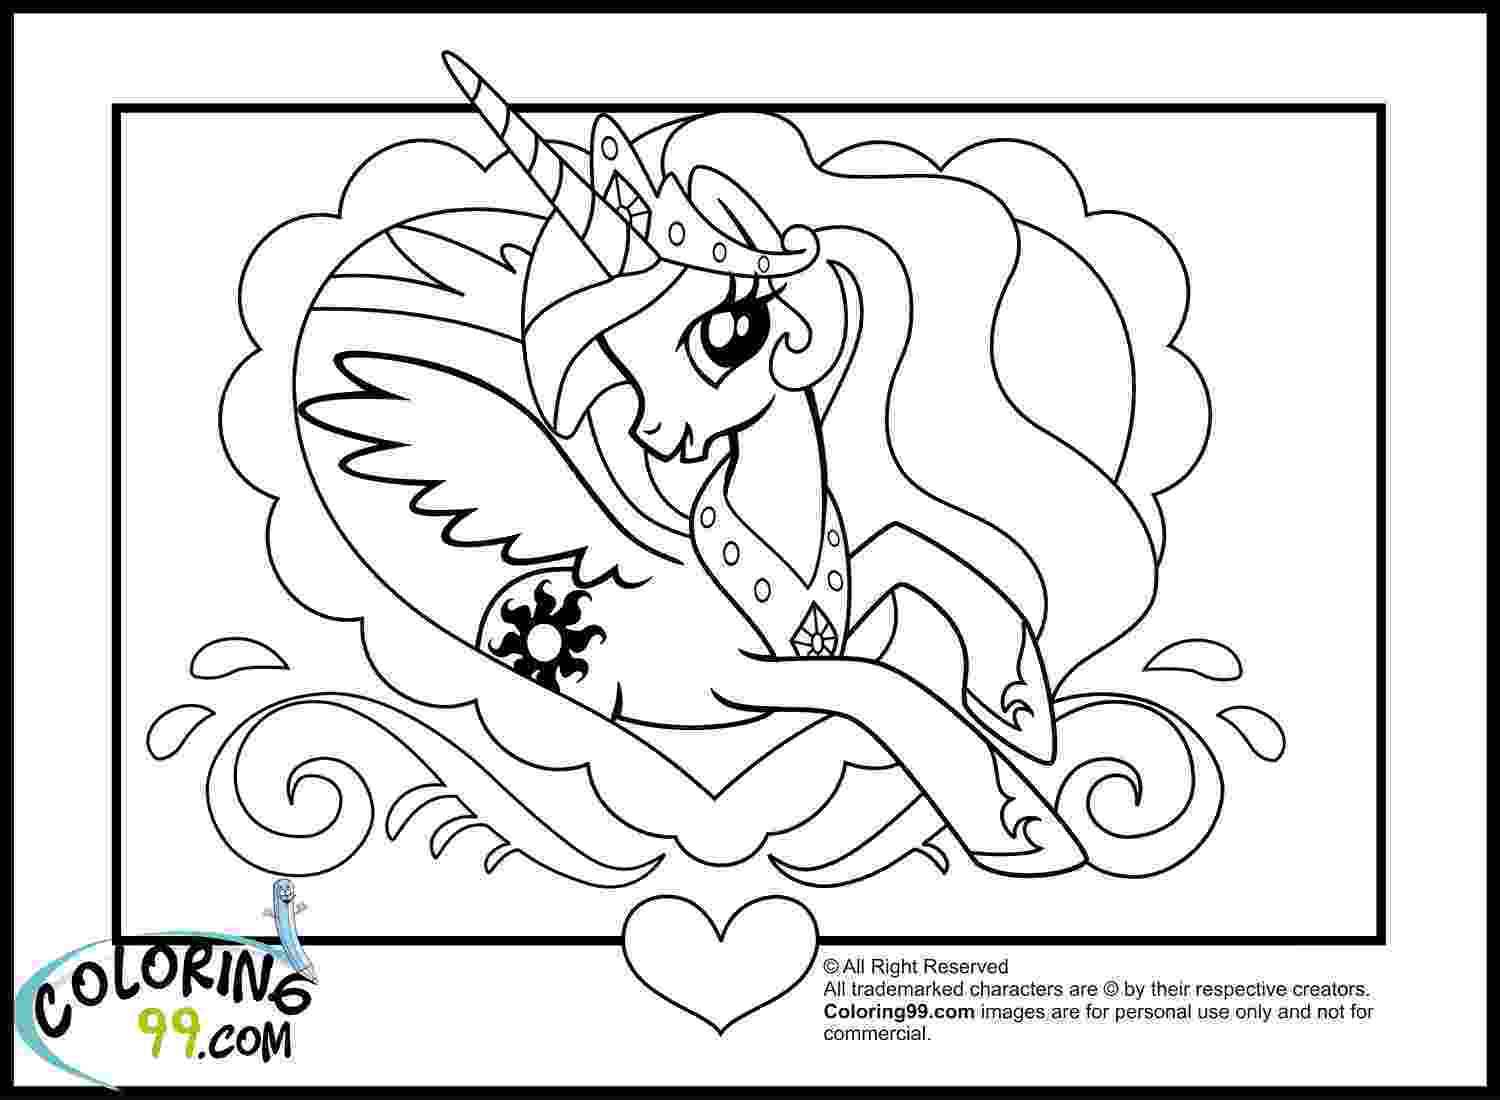 my little pony pages to color 20 my little pony coloring pages your kid will love neat little pages color to pony my 